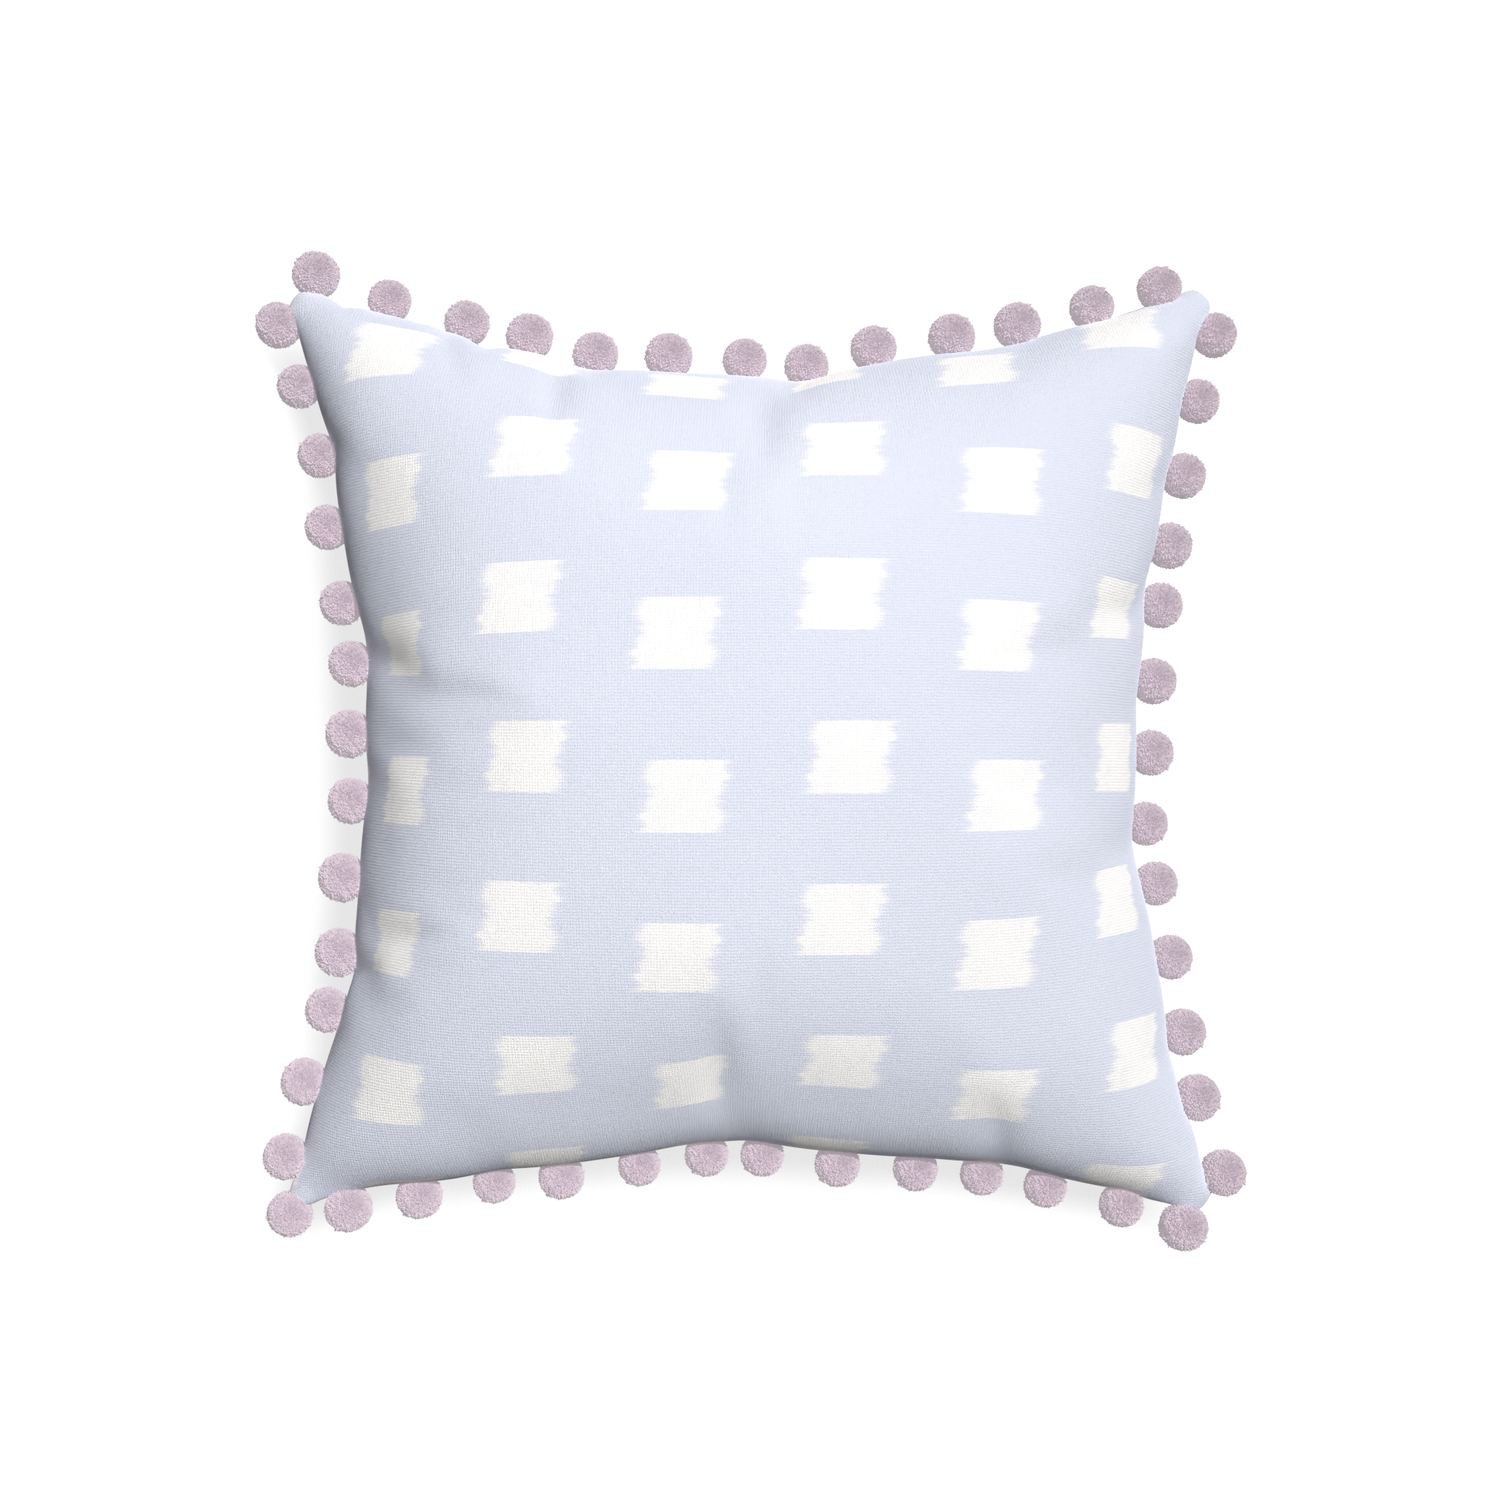 20-square denton custom sky blue patternpillow with l on white background